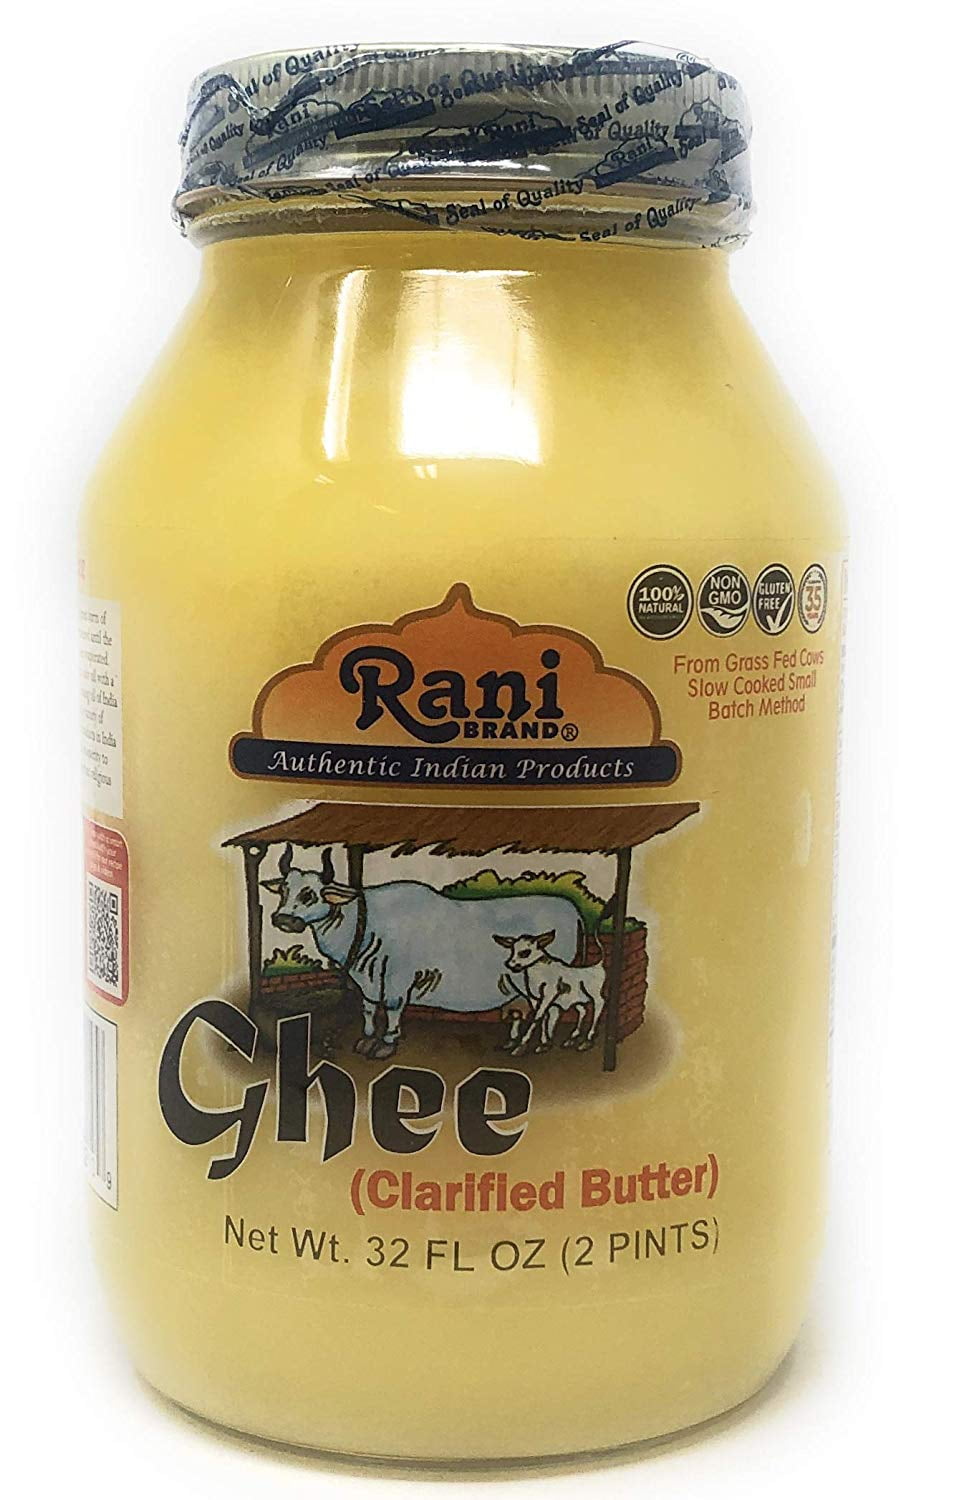 Rani Ghee Pure & Natural from Grass Fed Cows (Clarified Butter) 2lbs (32oz) ~ Glass Jar | Paleo Friendly | Keto Friendly | Gluten Free | Product of USA